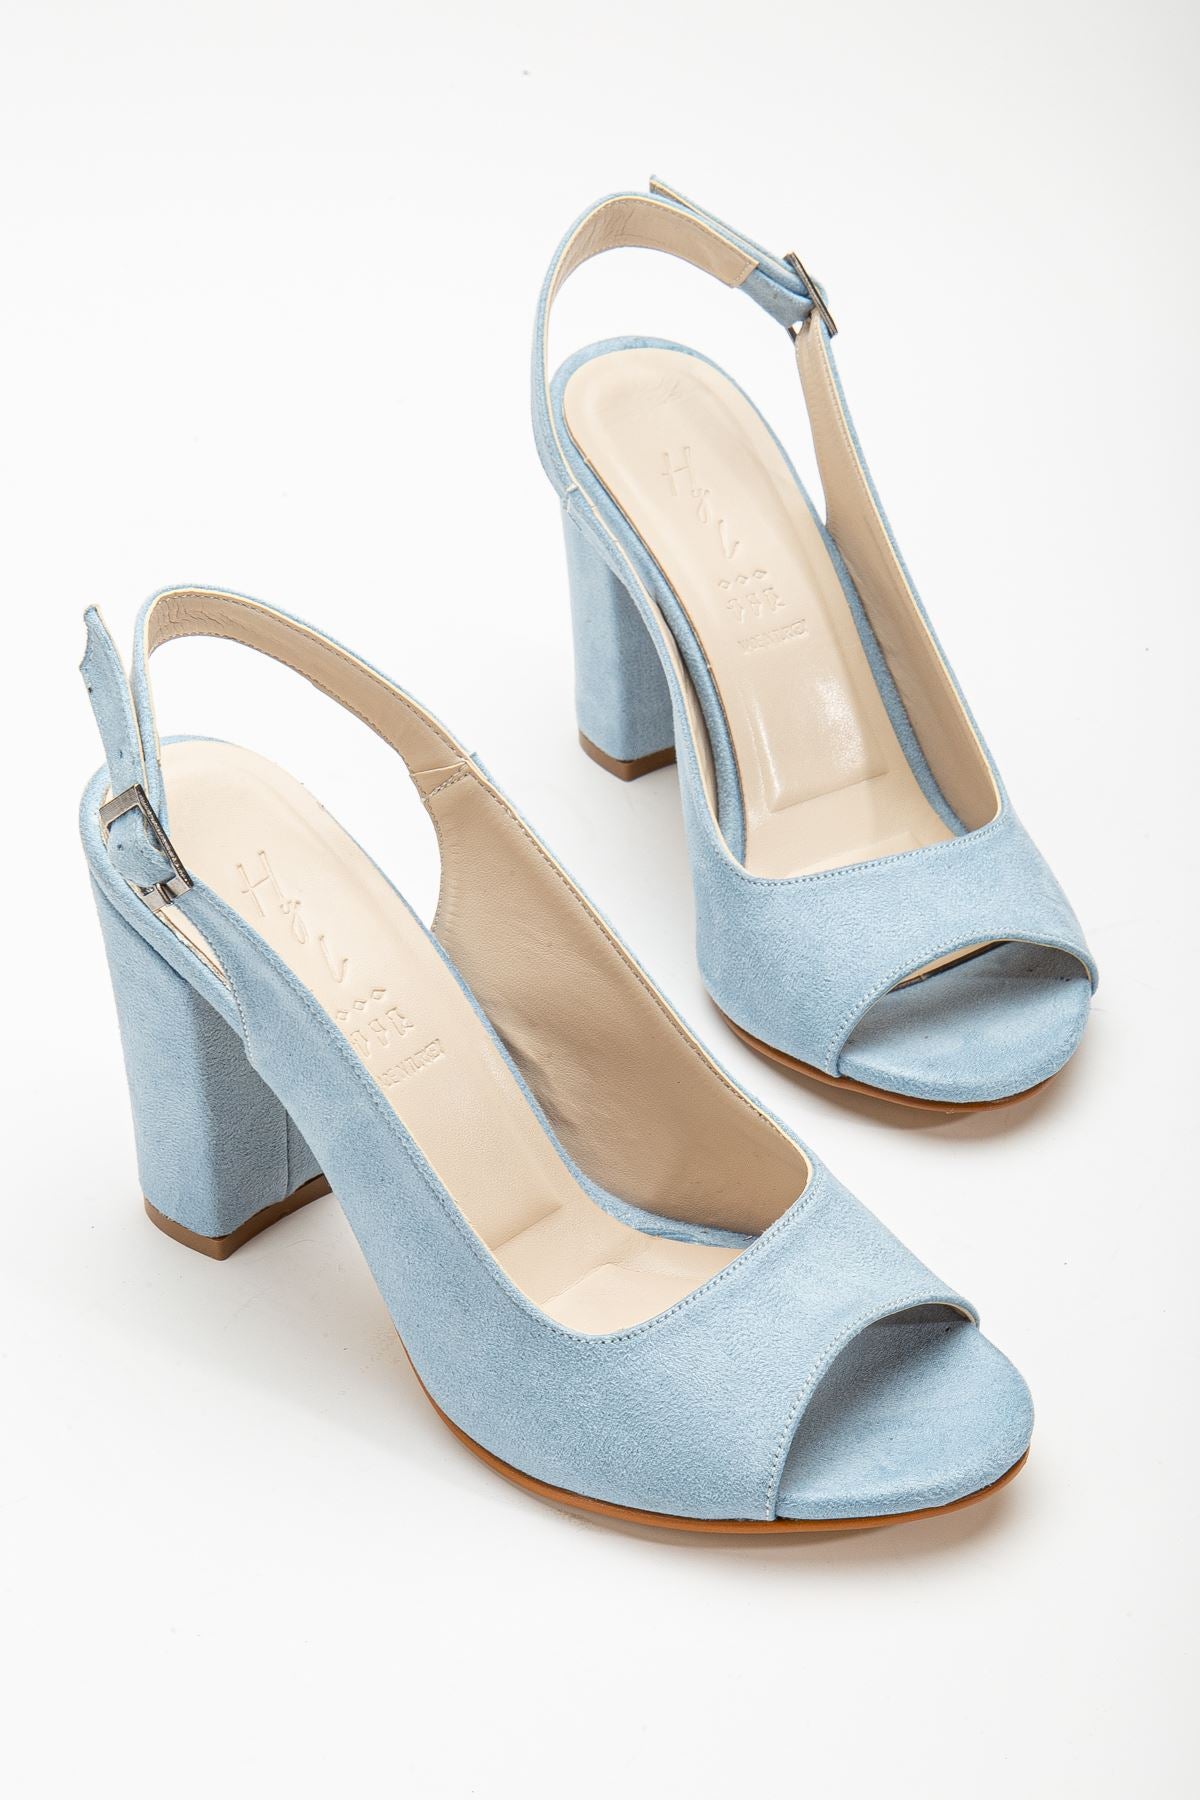 Meira Baby Blue Suede Detailed High Heeled Women's Shoes - STREETMODE™